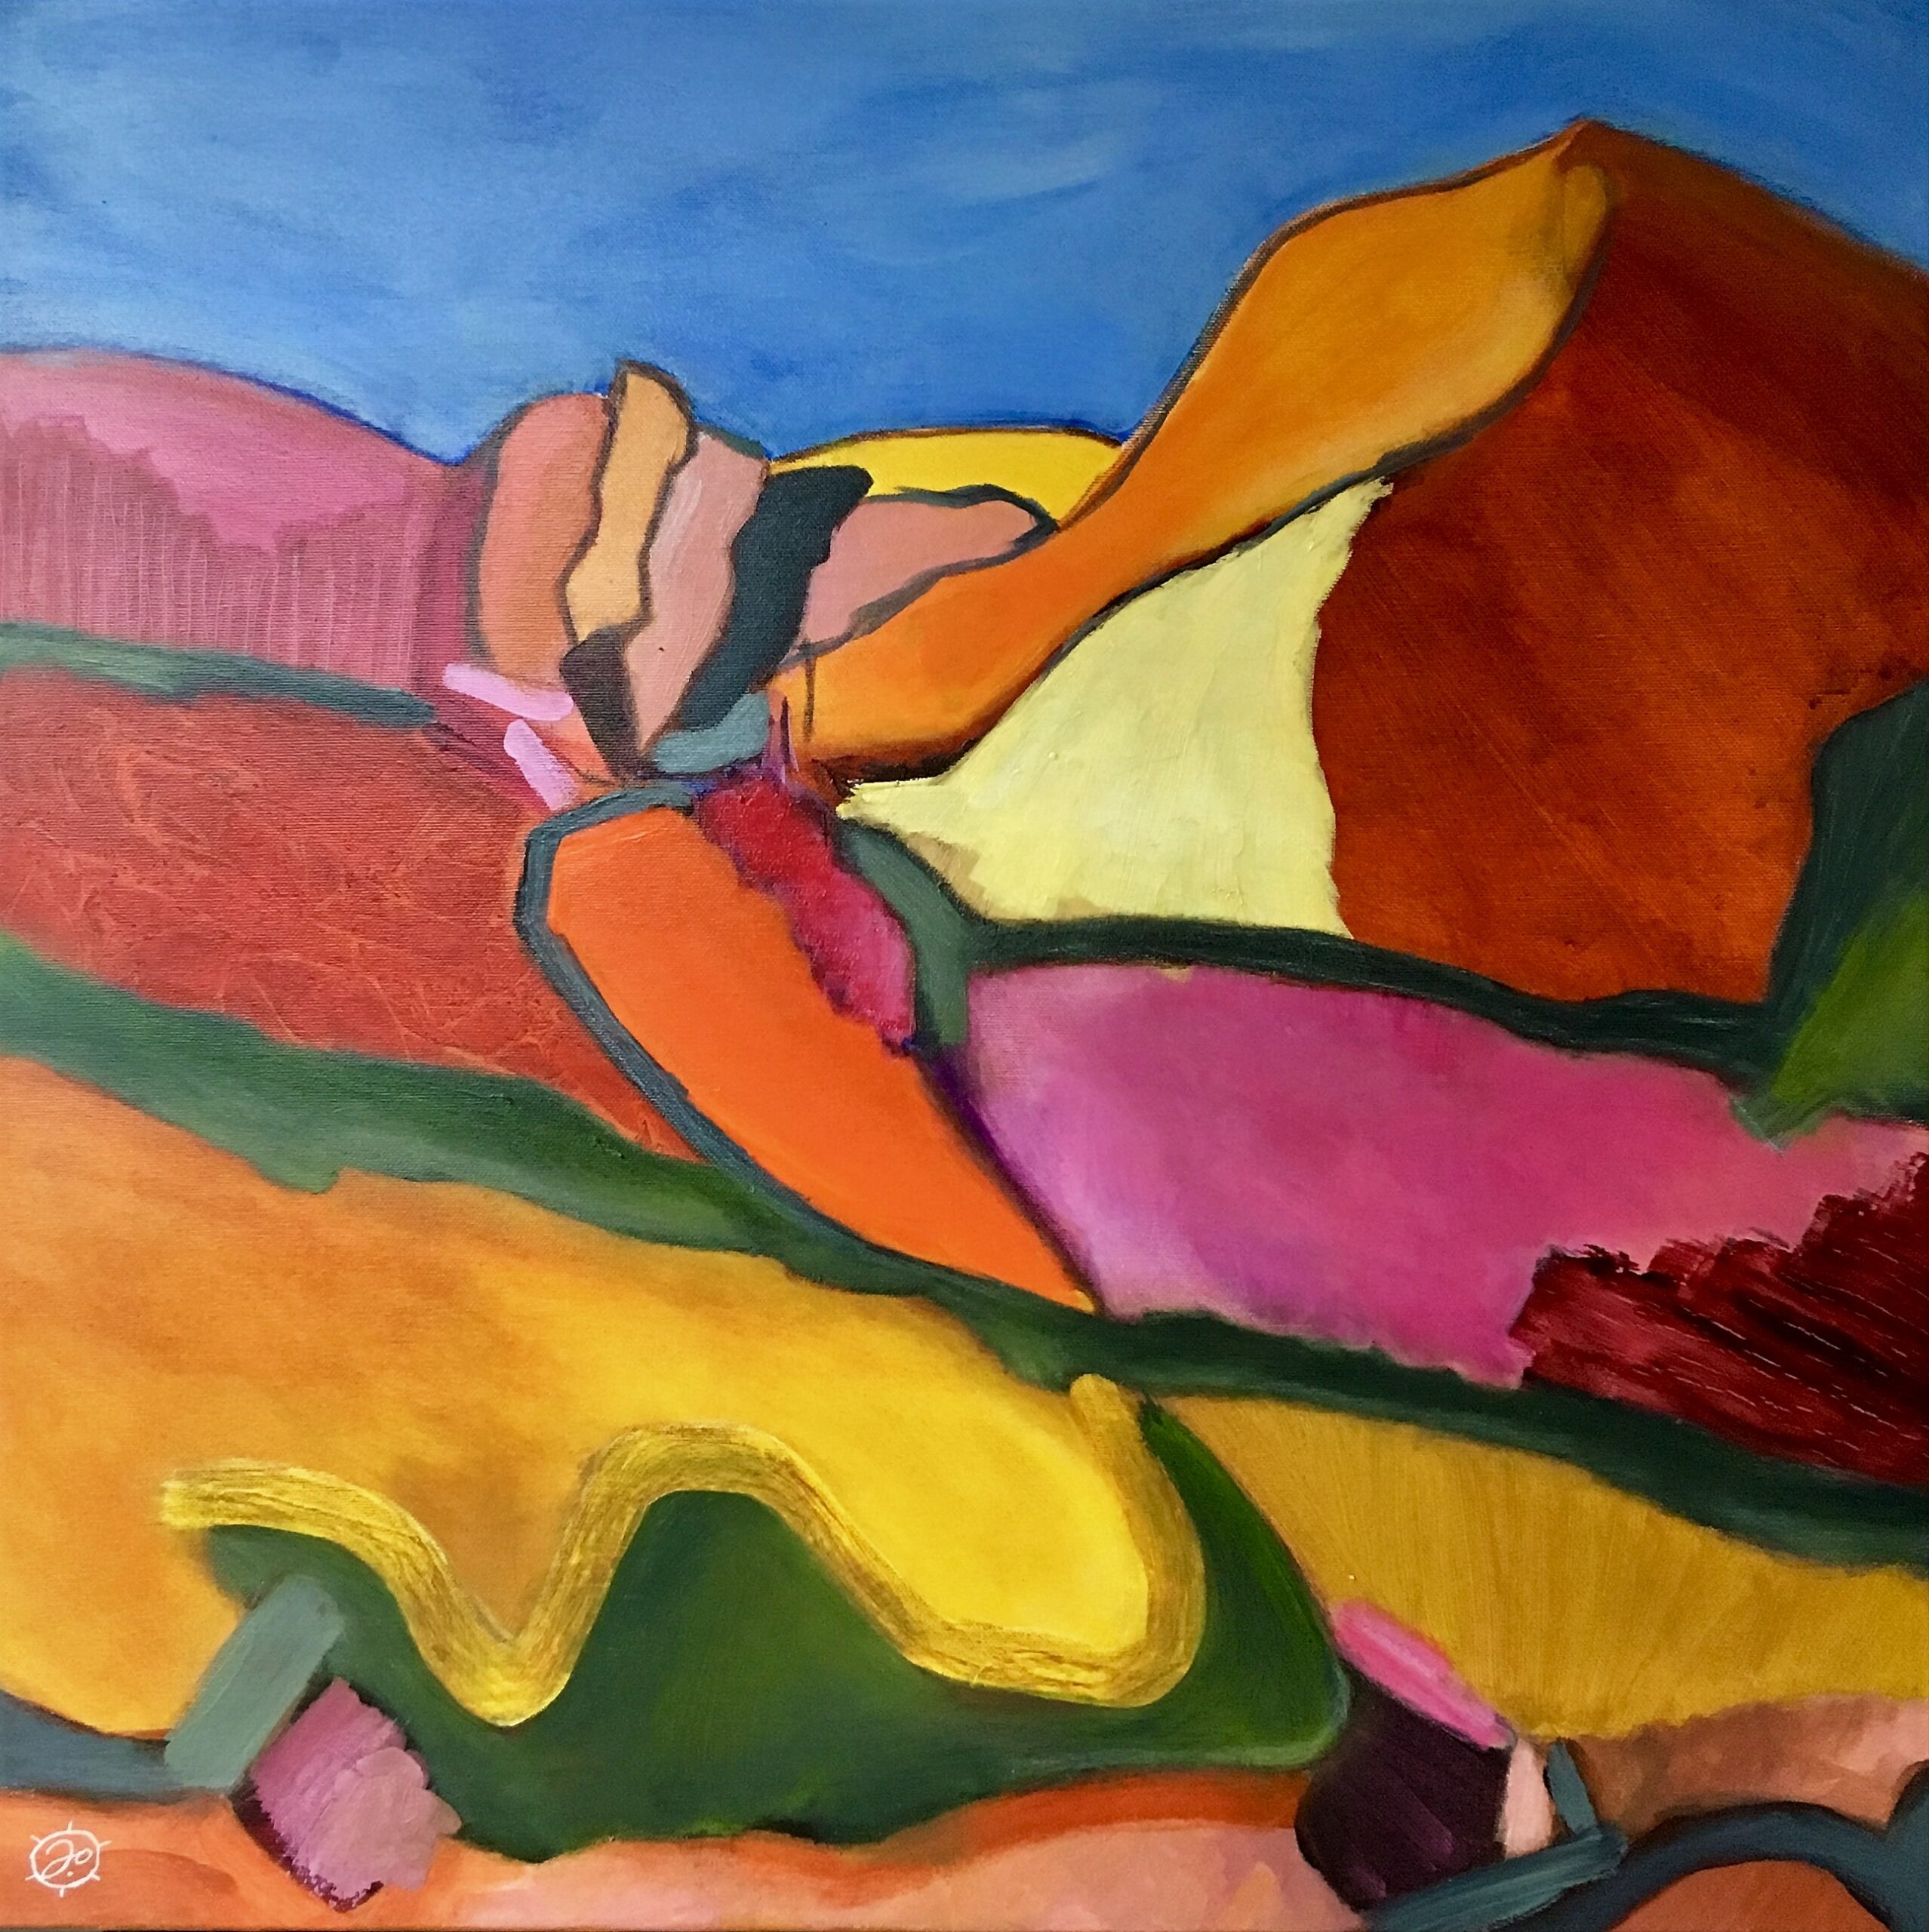 Abstract painting of rocks and hills in spice colors